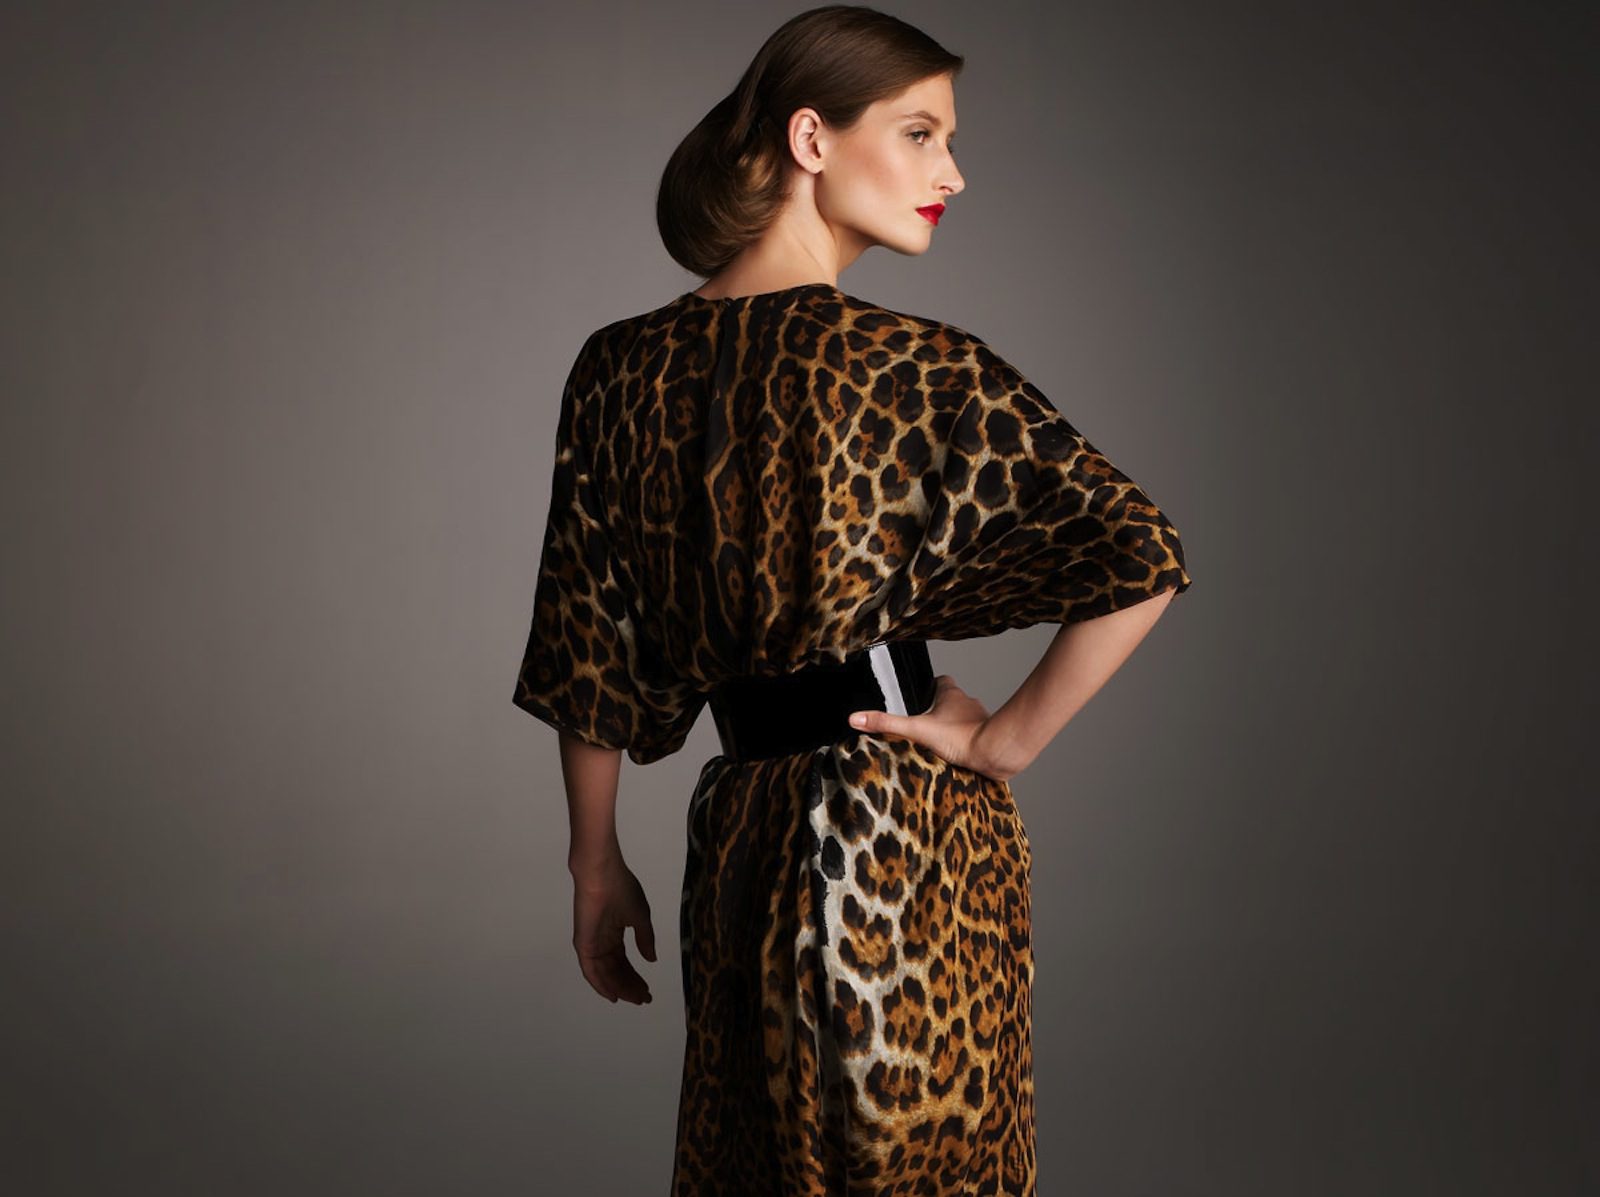 The Indispensable: Leopard Print #3 on vickiarcher.com